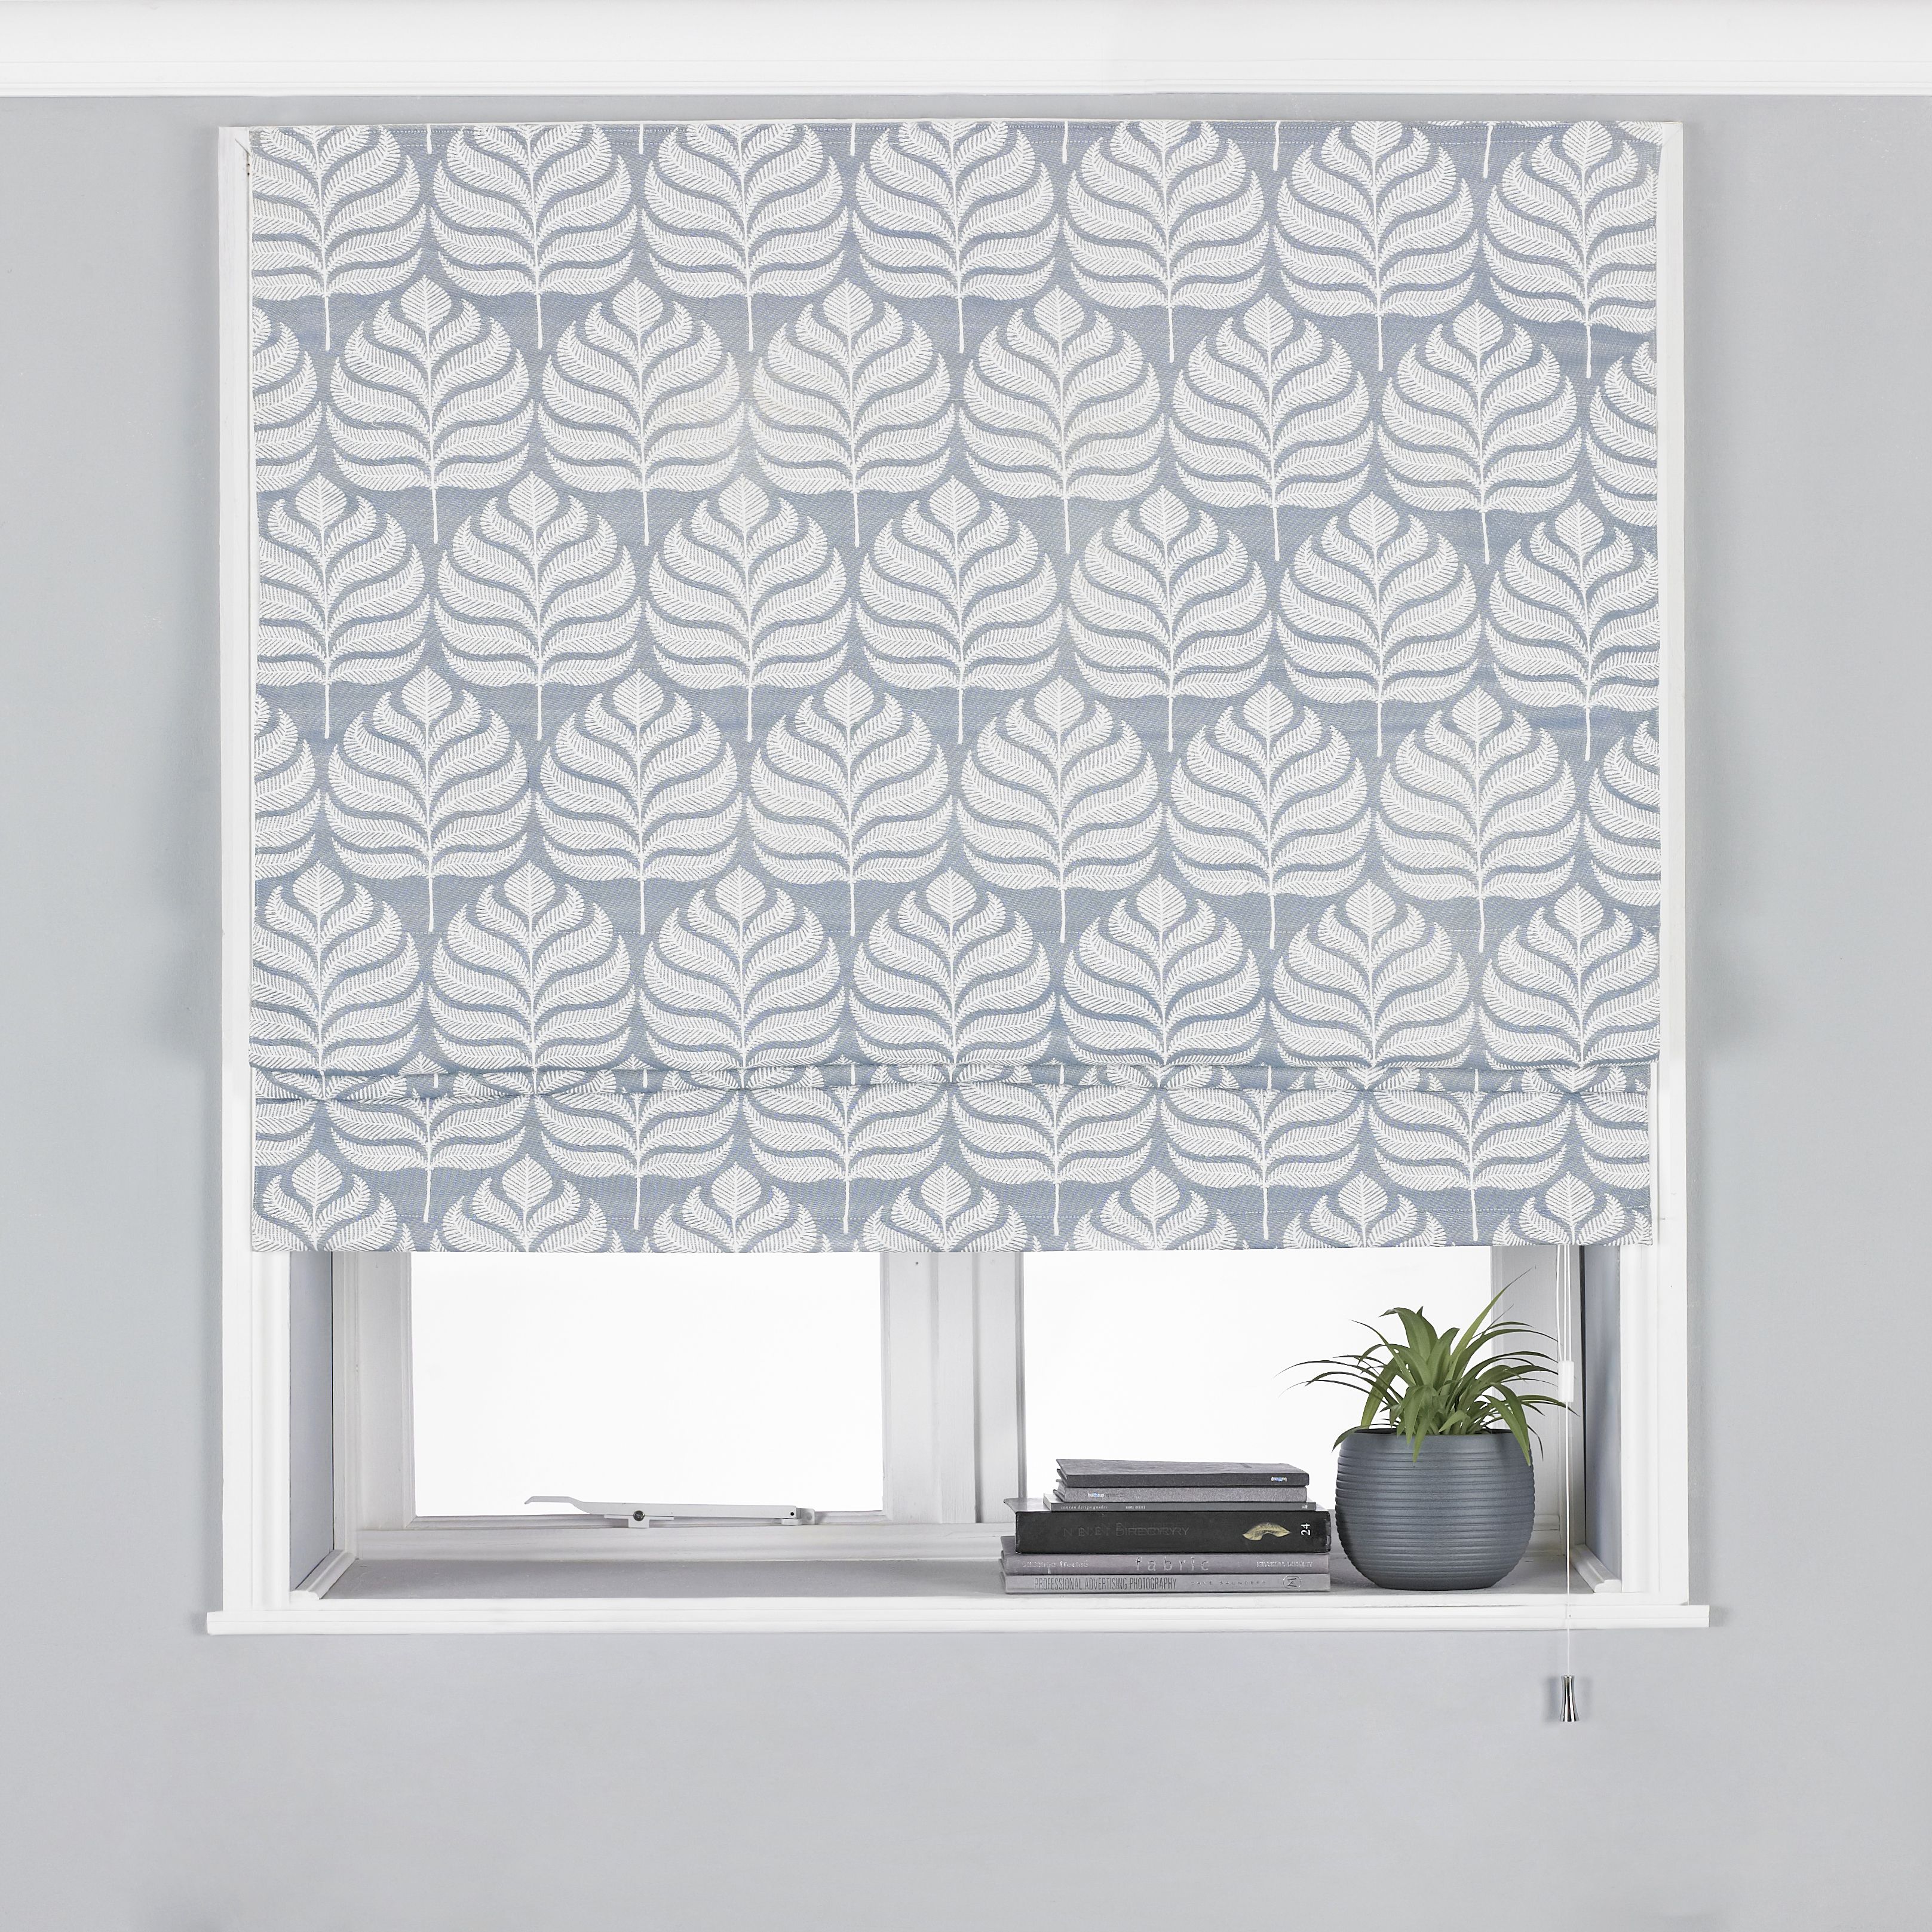 The Horto is sure to add a fresh, spring-like feel to any interior; with three tranquil colours and a luxurious jacquard botanical design. These Blinds are bound to get some attention!